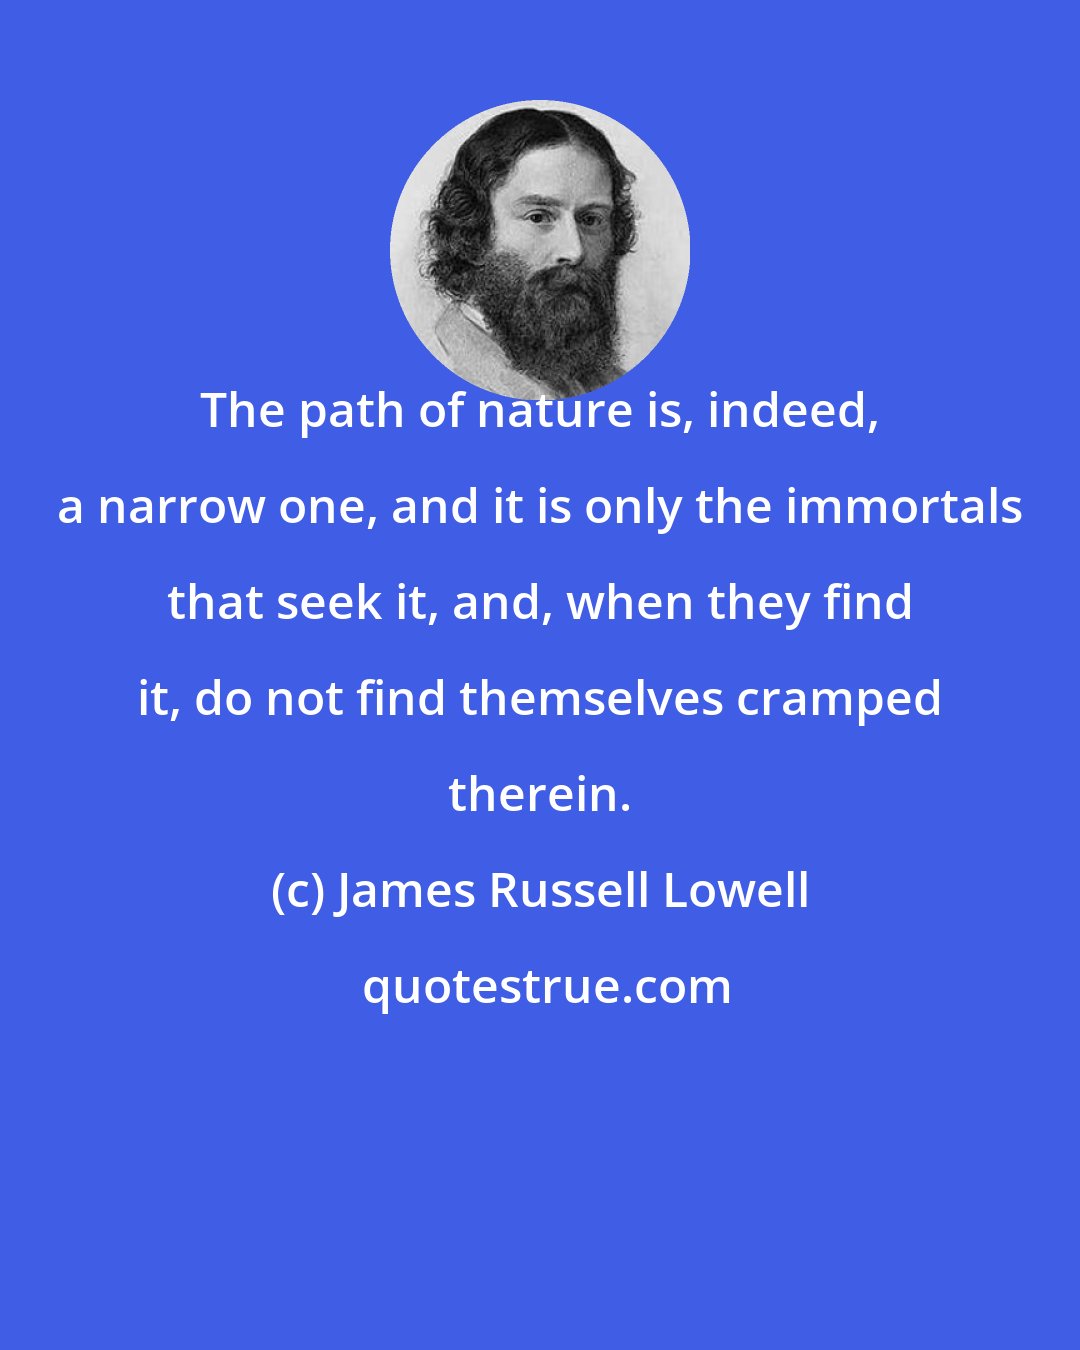 James Russell Lowell: The path of nature is, indeed, a narrow one, and it is only the immortals that seek it, and, when they find it, do not find themselves cramped therein.